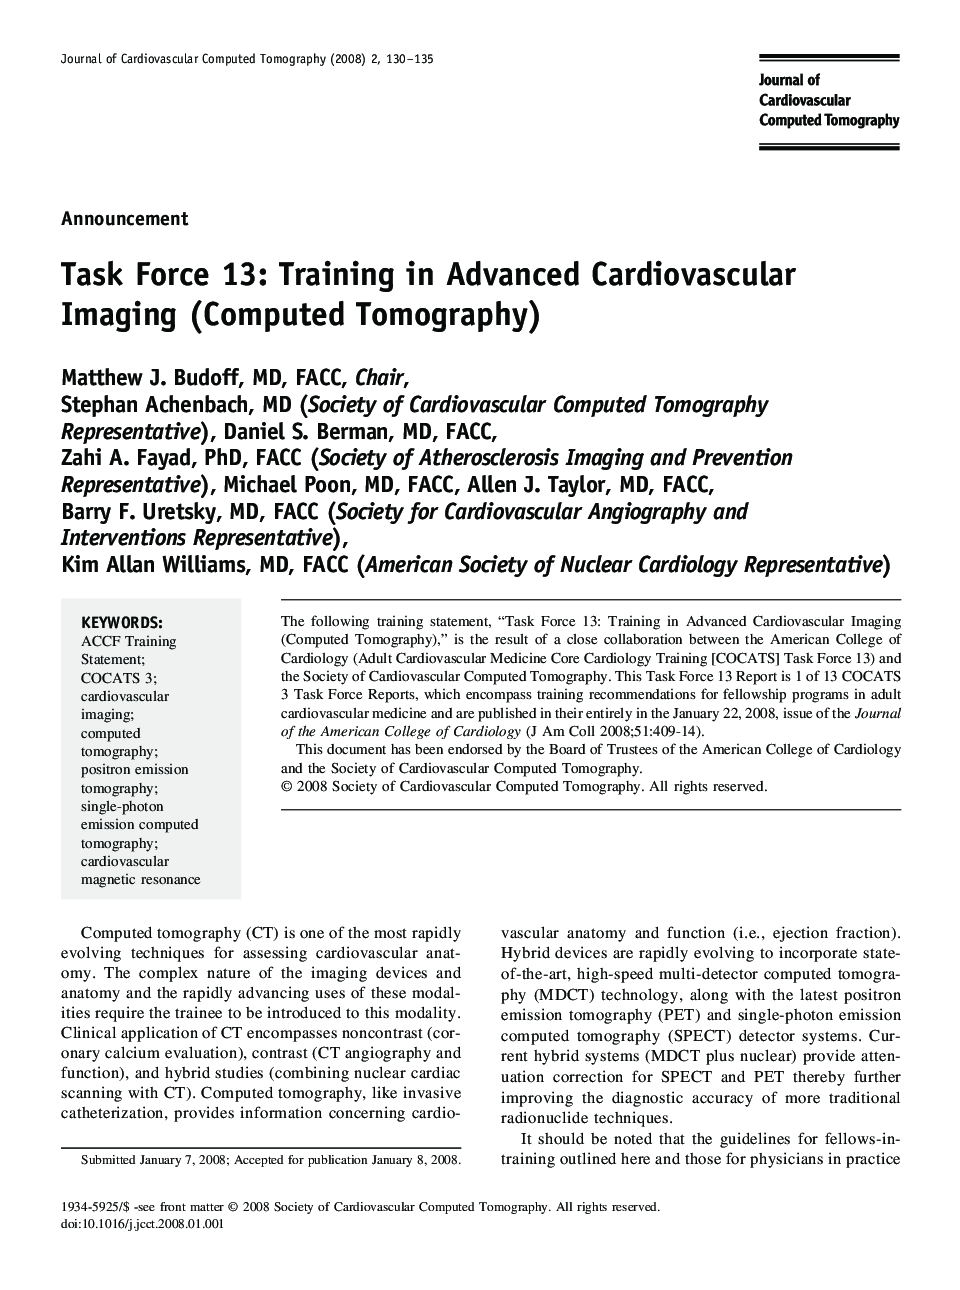 Task Force 13: Training in Advanced Cardiovascular Imaging (Computed Tomography)